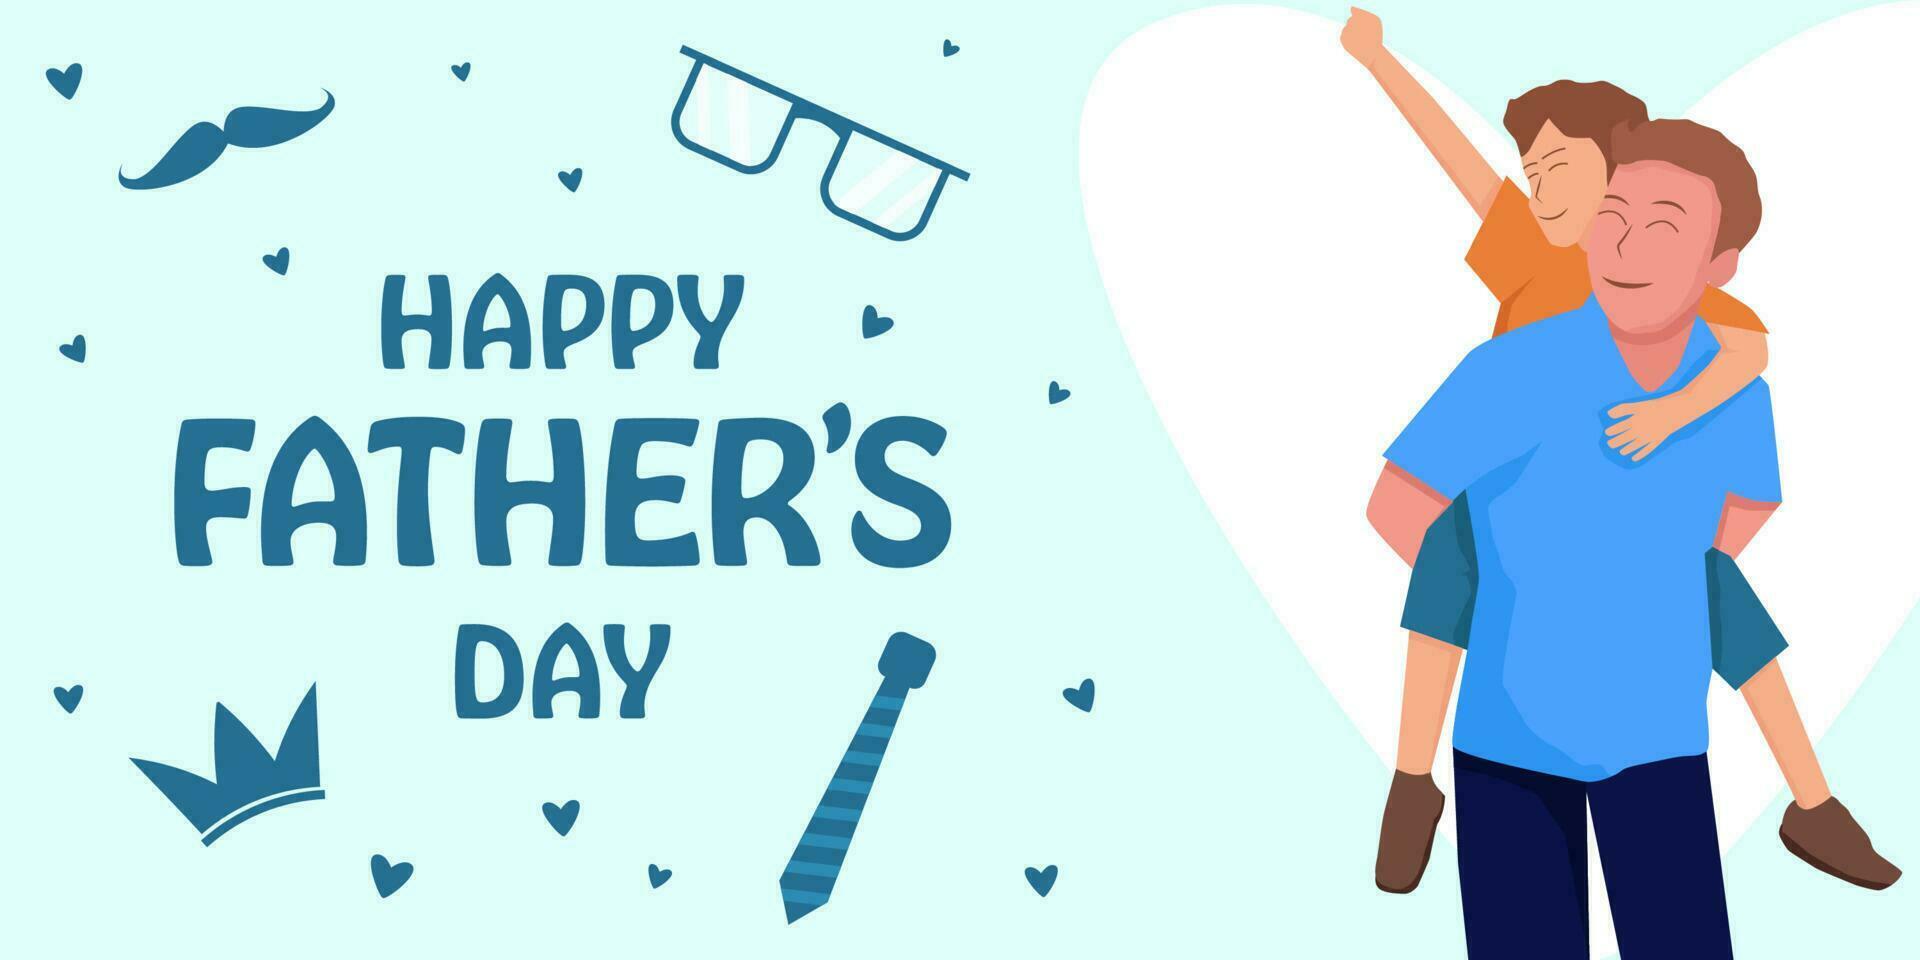 vector horizontal banner happy father's day design illustration with the father carrying the son